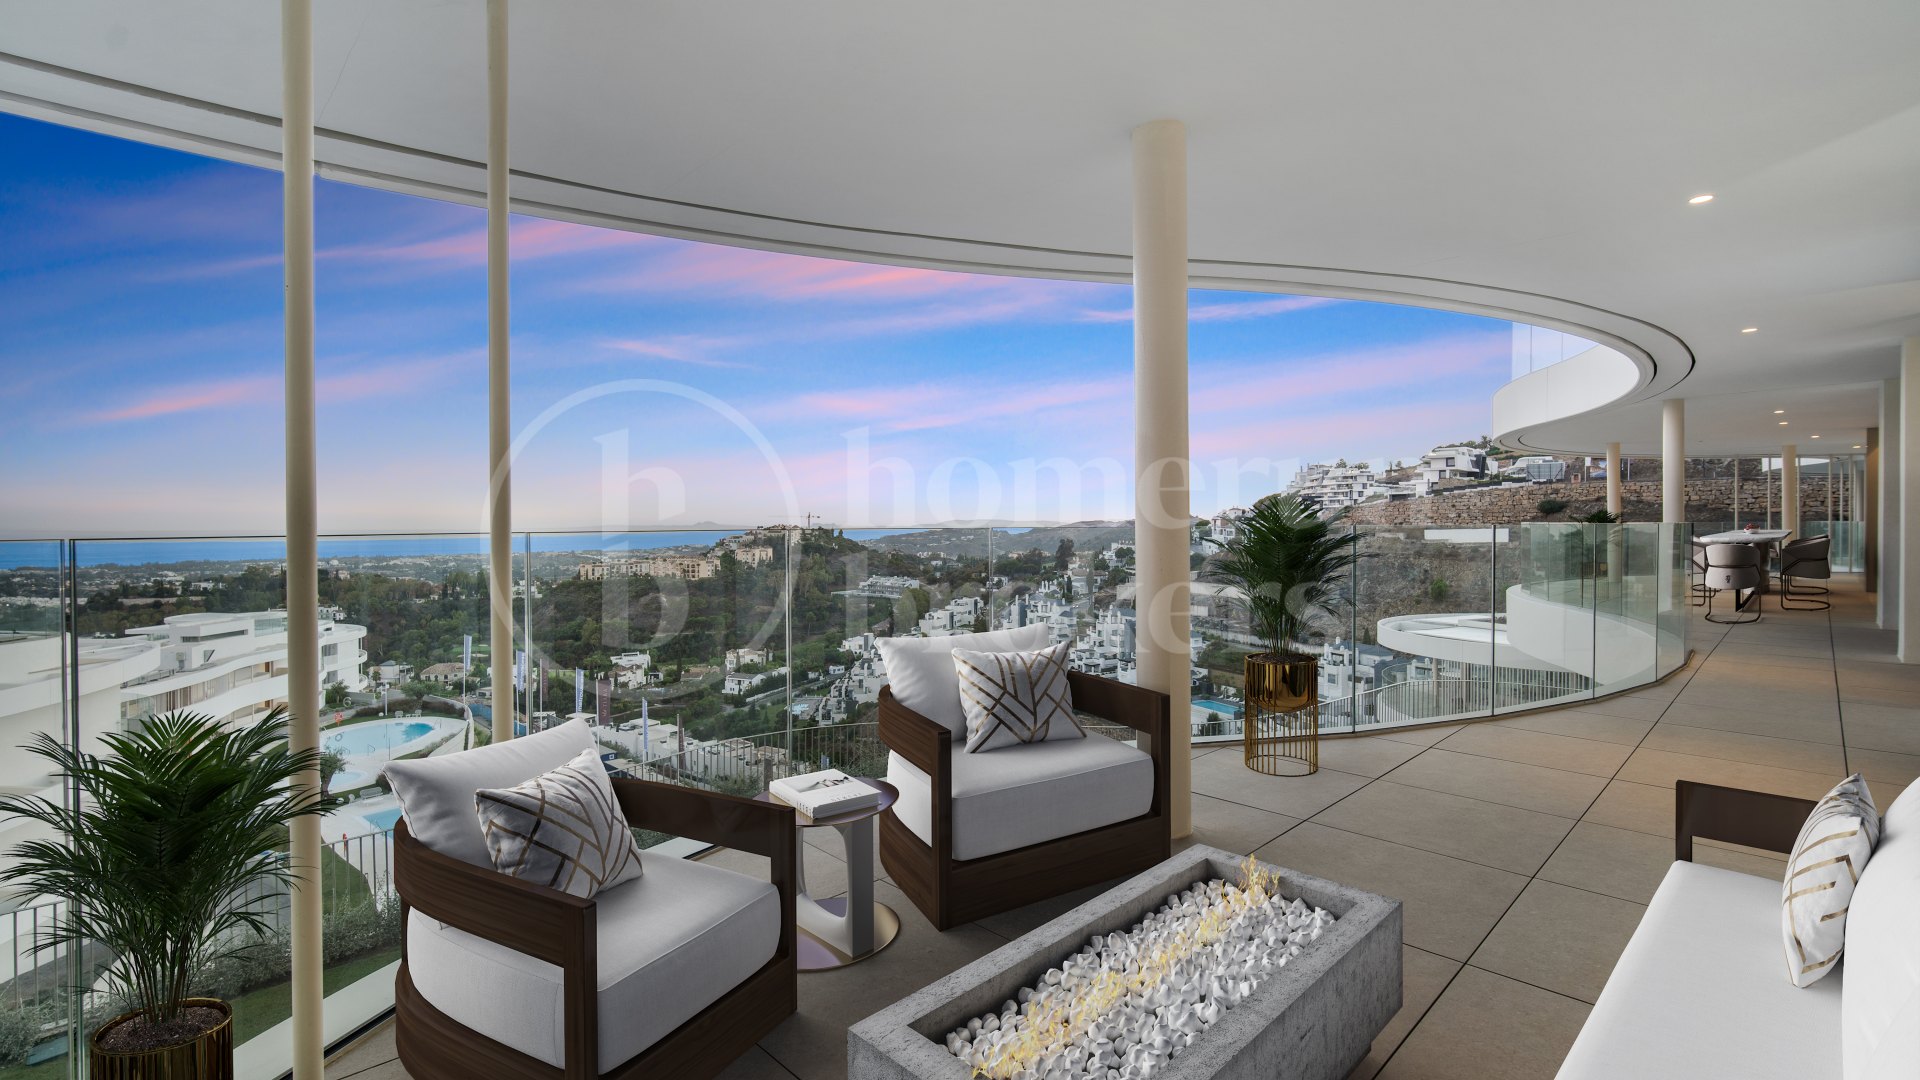 The View - Apartment with Breathtaking Panoramic Views in Benahavis